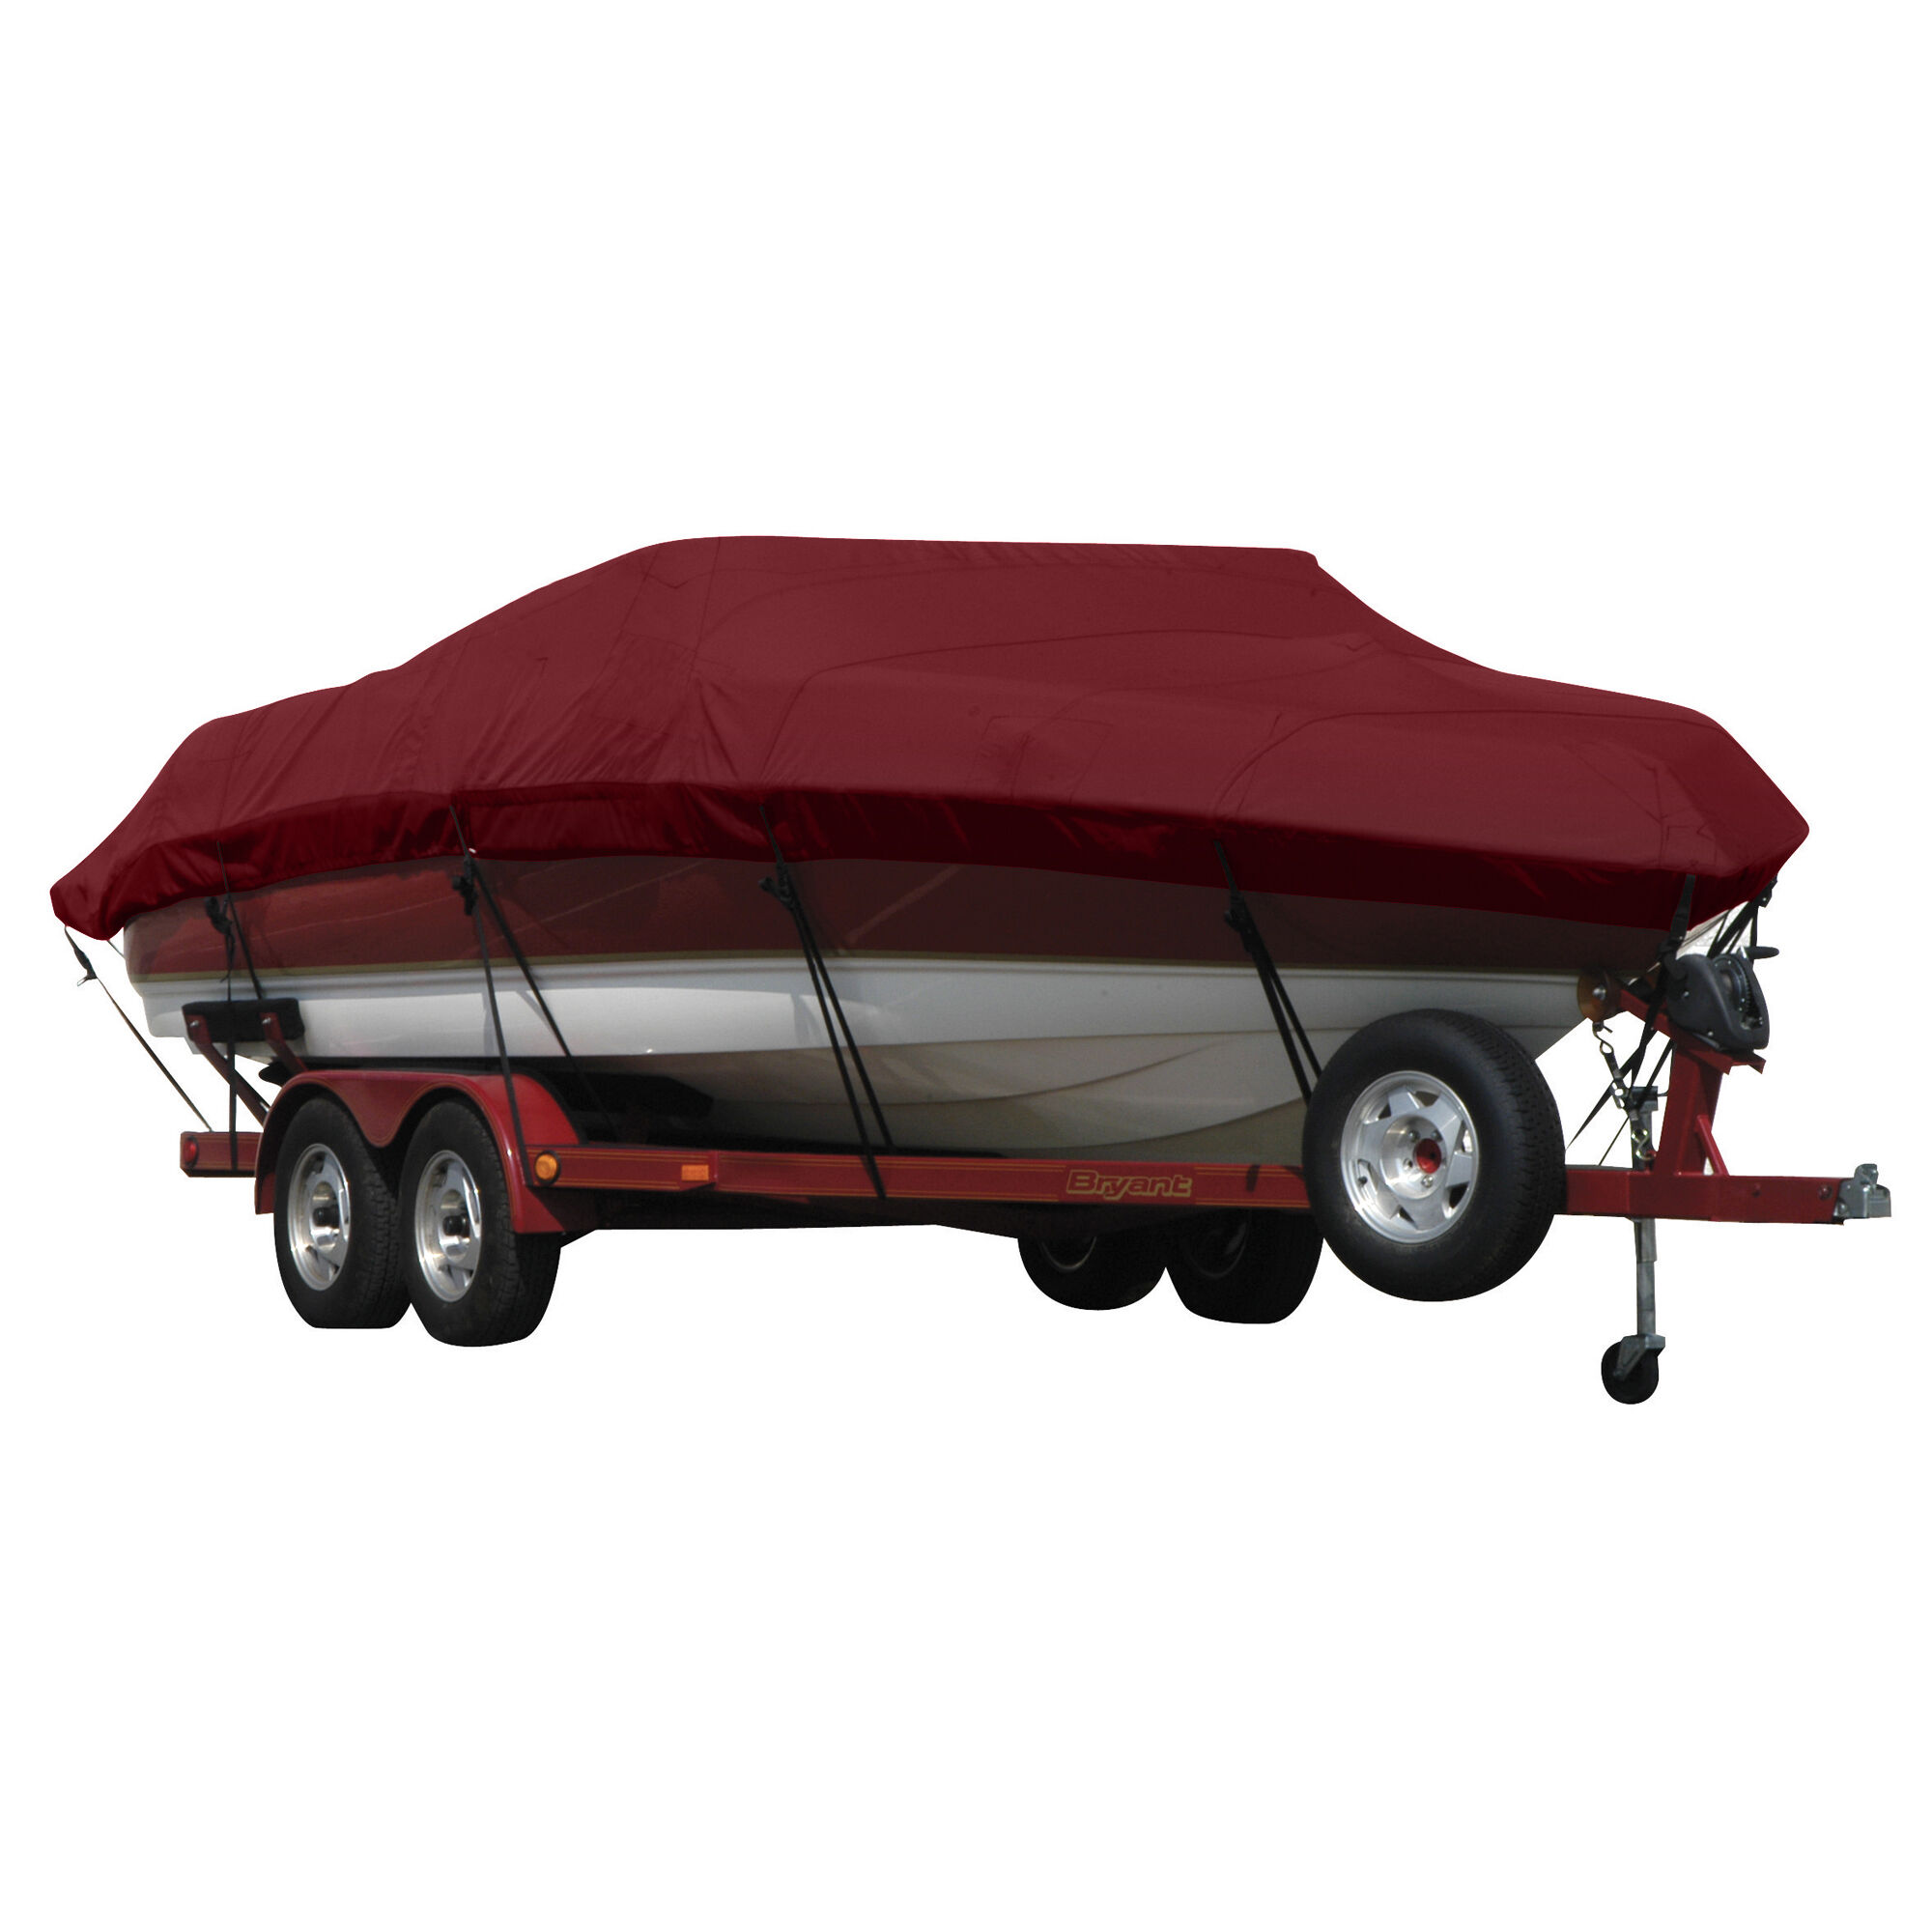 Covermate Exact Fit Sunbrella Boat Cover for Bayliner Classic 2252 Cp Classic 2252 Cp Cuddy Hard Top I/O. Burgundy